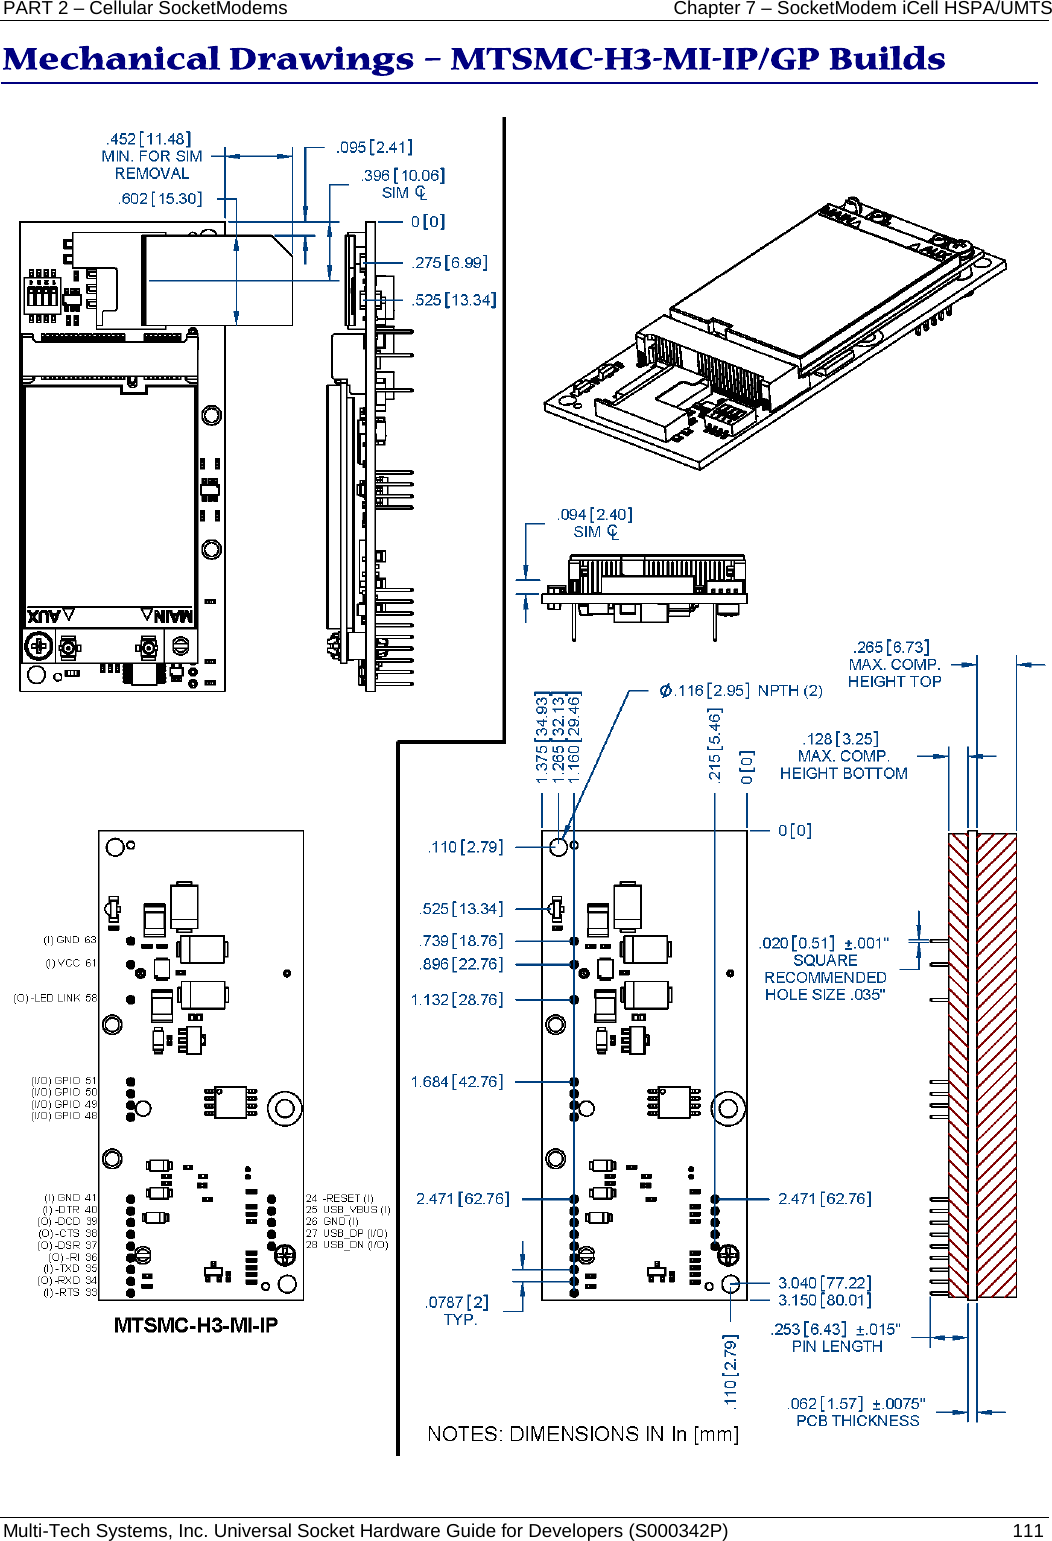 PART 2 – Cellular SocketModems Chapter 7 – SocketModem iCell HSPA/UMTS Multi-Tech Systems, Inc. Universal Socket Hardware Guide for Developers (S000342P)  111  Mechanical Drawings – MTSMC-H3-MI-IP/GP Builds  